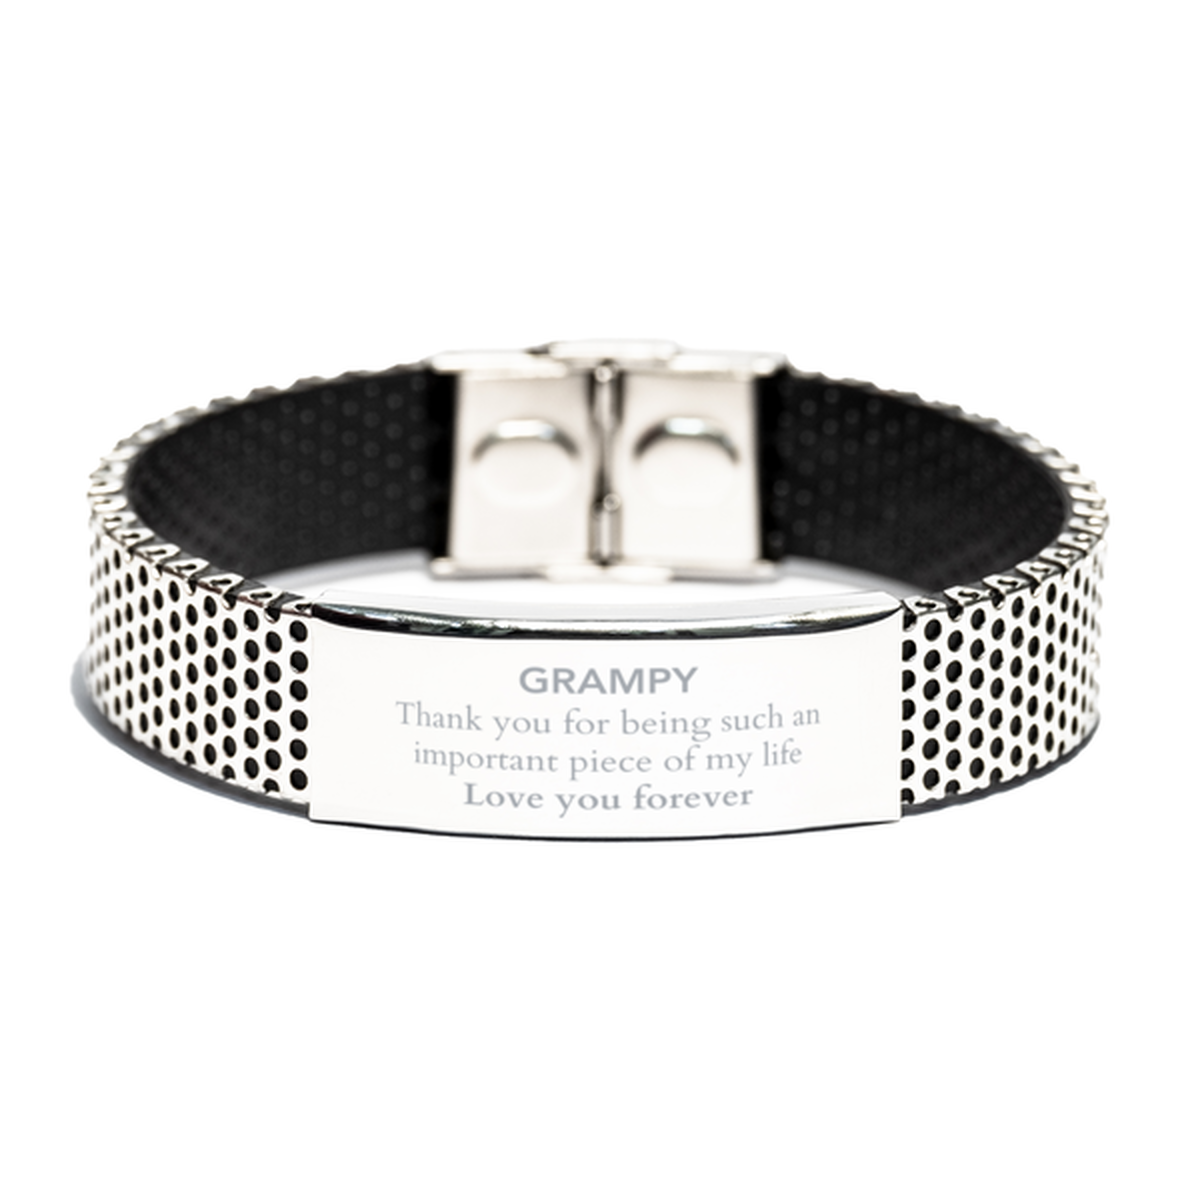 Appropriate Grampy Stainless Steel Bracelet Epic Birthday Gifts for Grampy Thank you for being such an important piece of my life Grampy Christmas Mothers Fathers Day